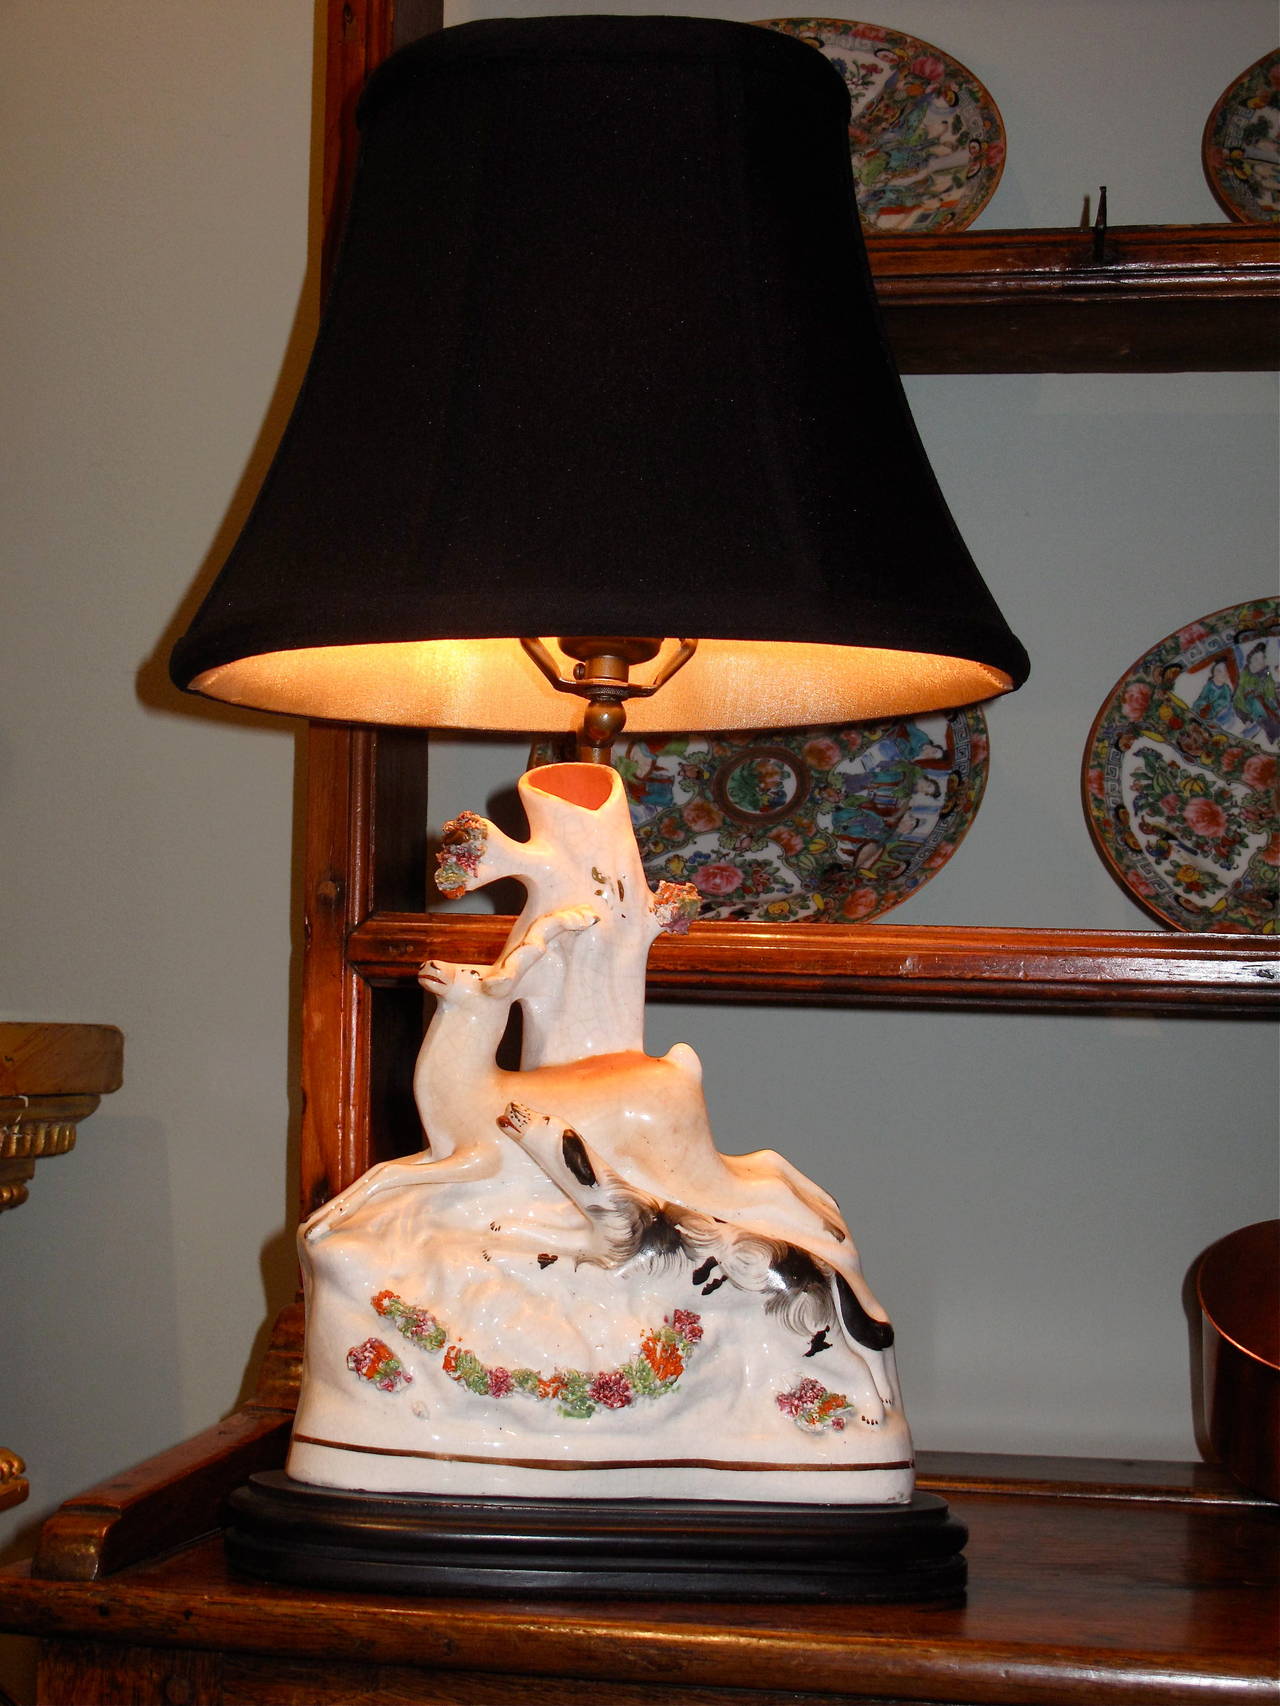 A late 19th century English Staffordshire figural group featuring an English setter chasing a stag, adapted into a lamp. Excellent condition with good detail including a delicate polychrome applied shredded clay garland.